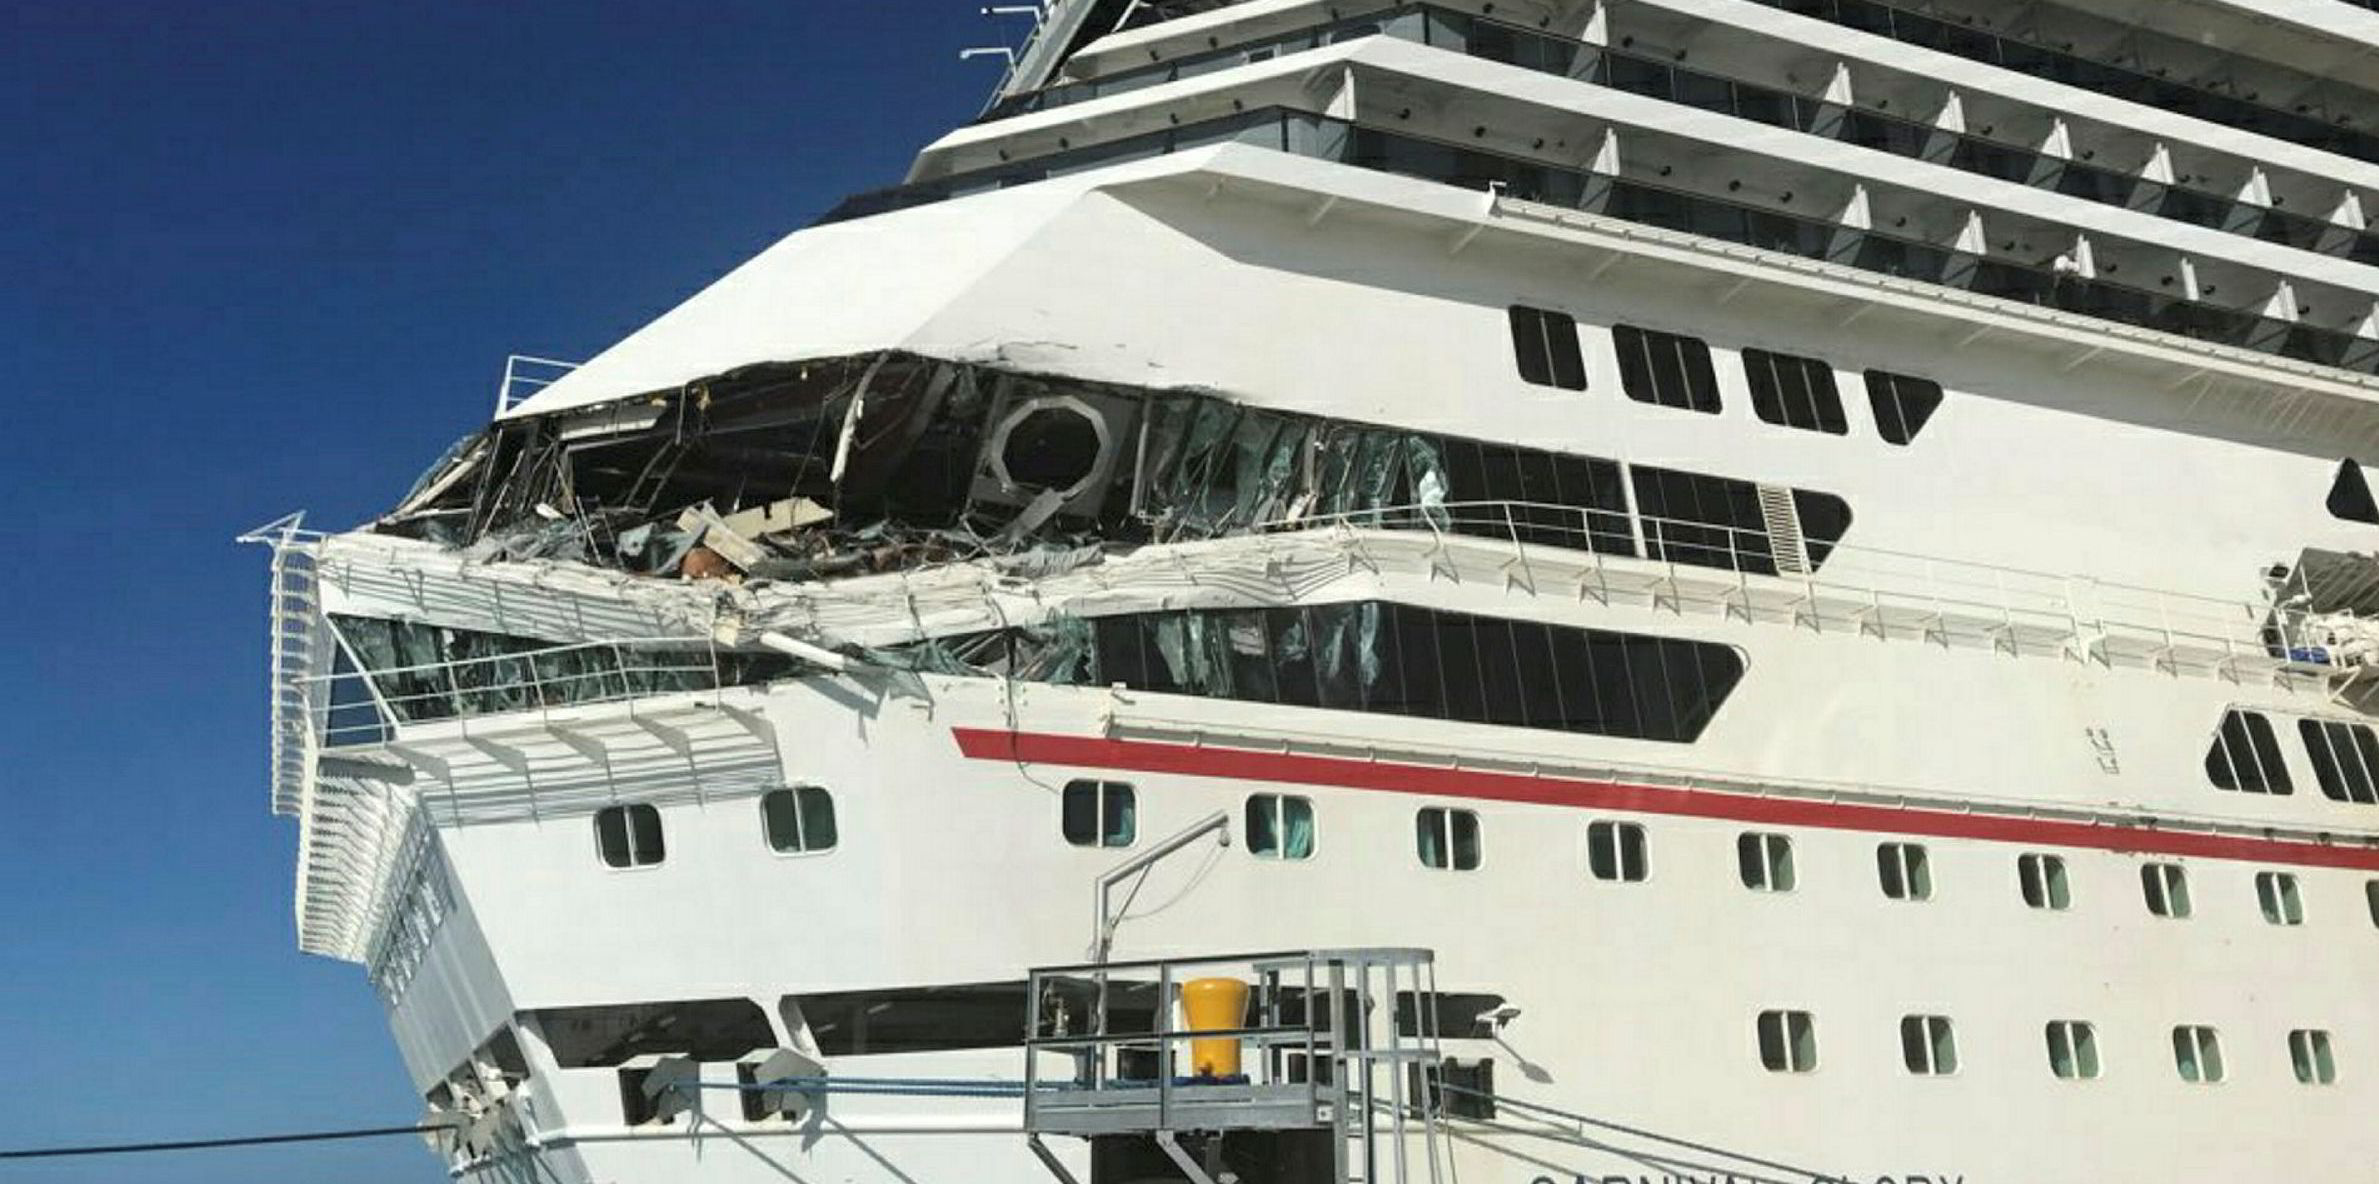 Video shows collision of Carnival cruiseships that injured six TradeWinds